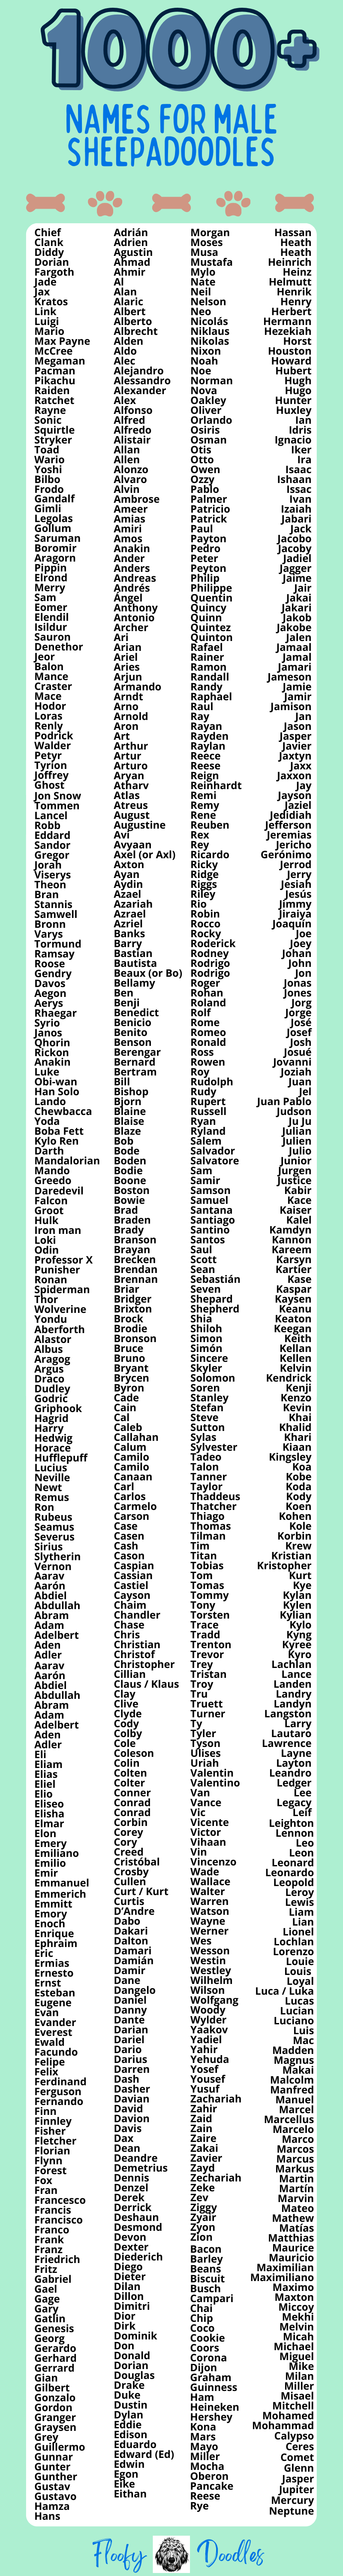 List of over 1000 unique names for male Sheepadoodle dogs